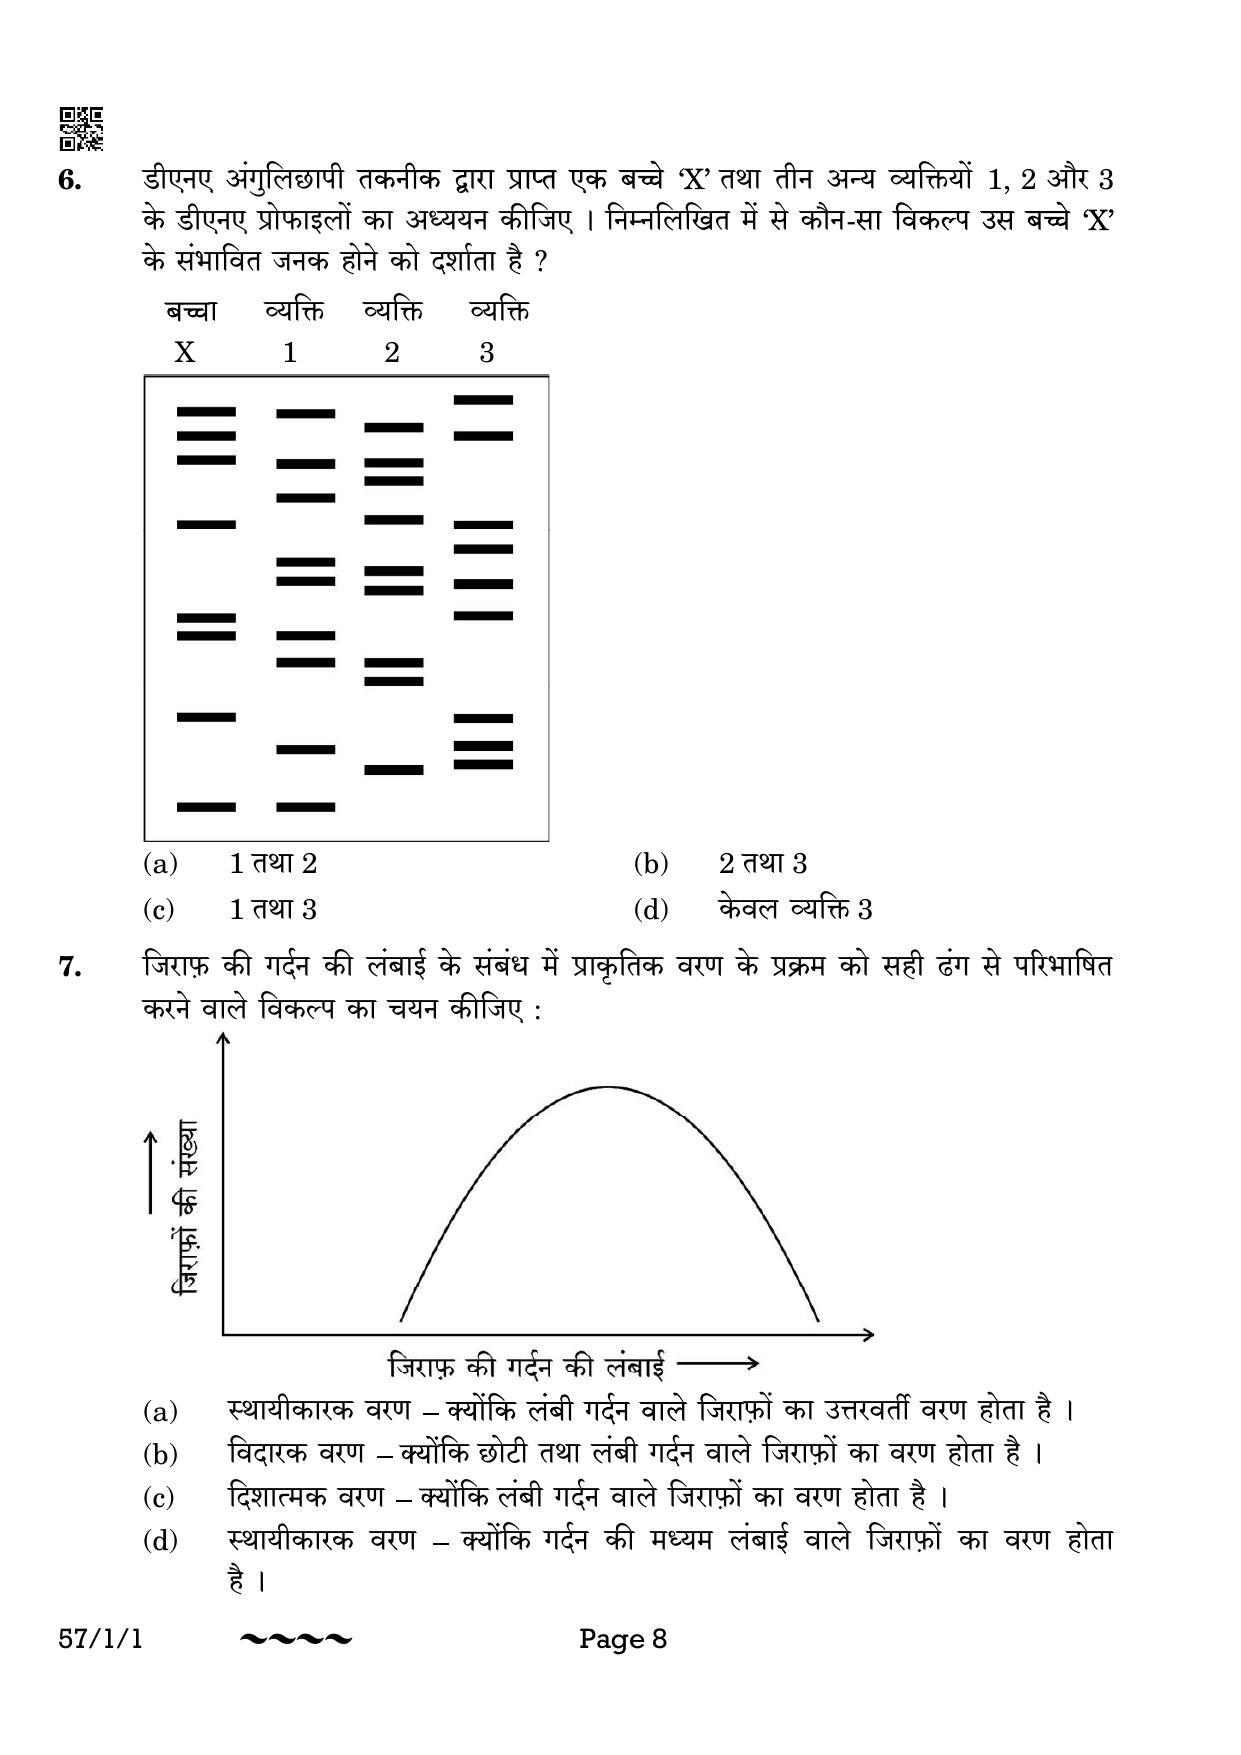 CBSE Class 12 57-1-1 Biology 2023 Question Paper - Page 8